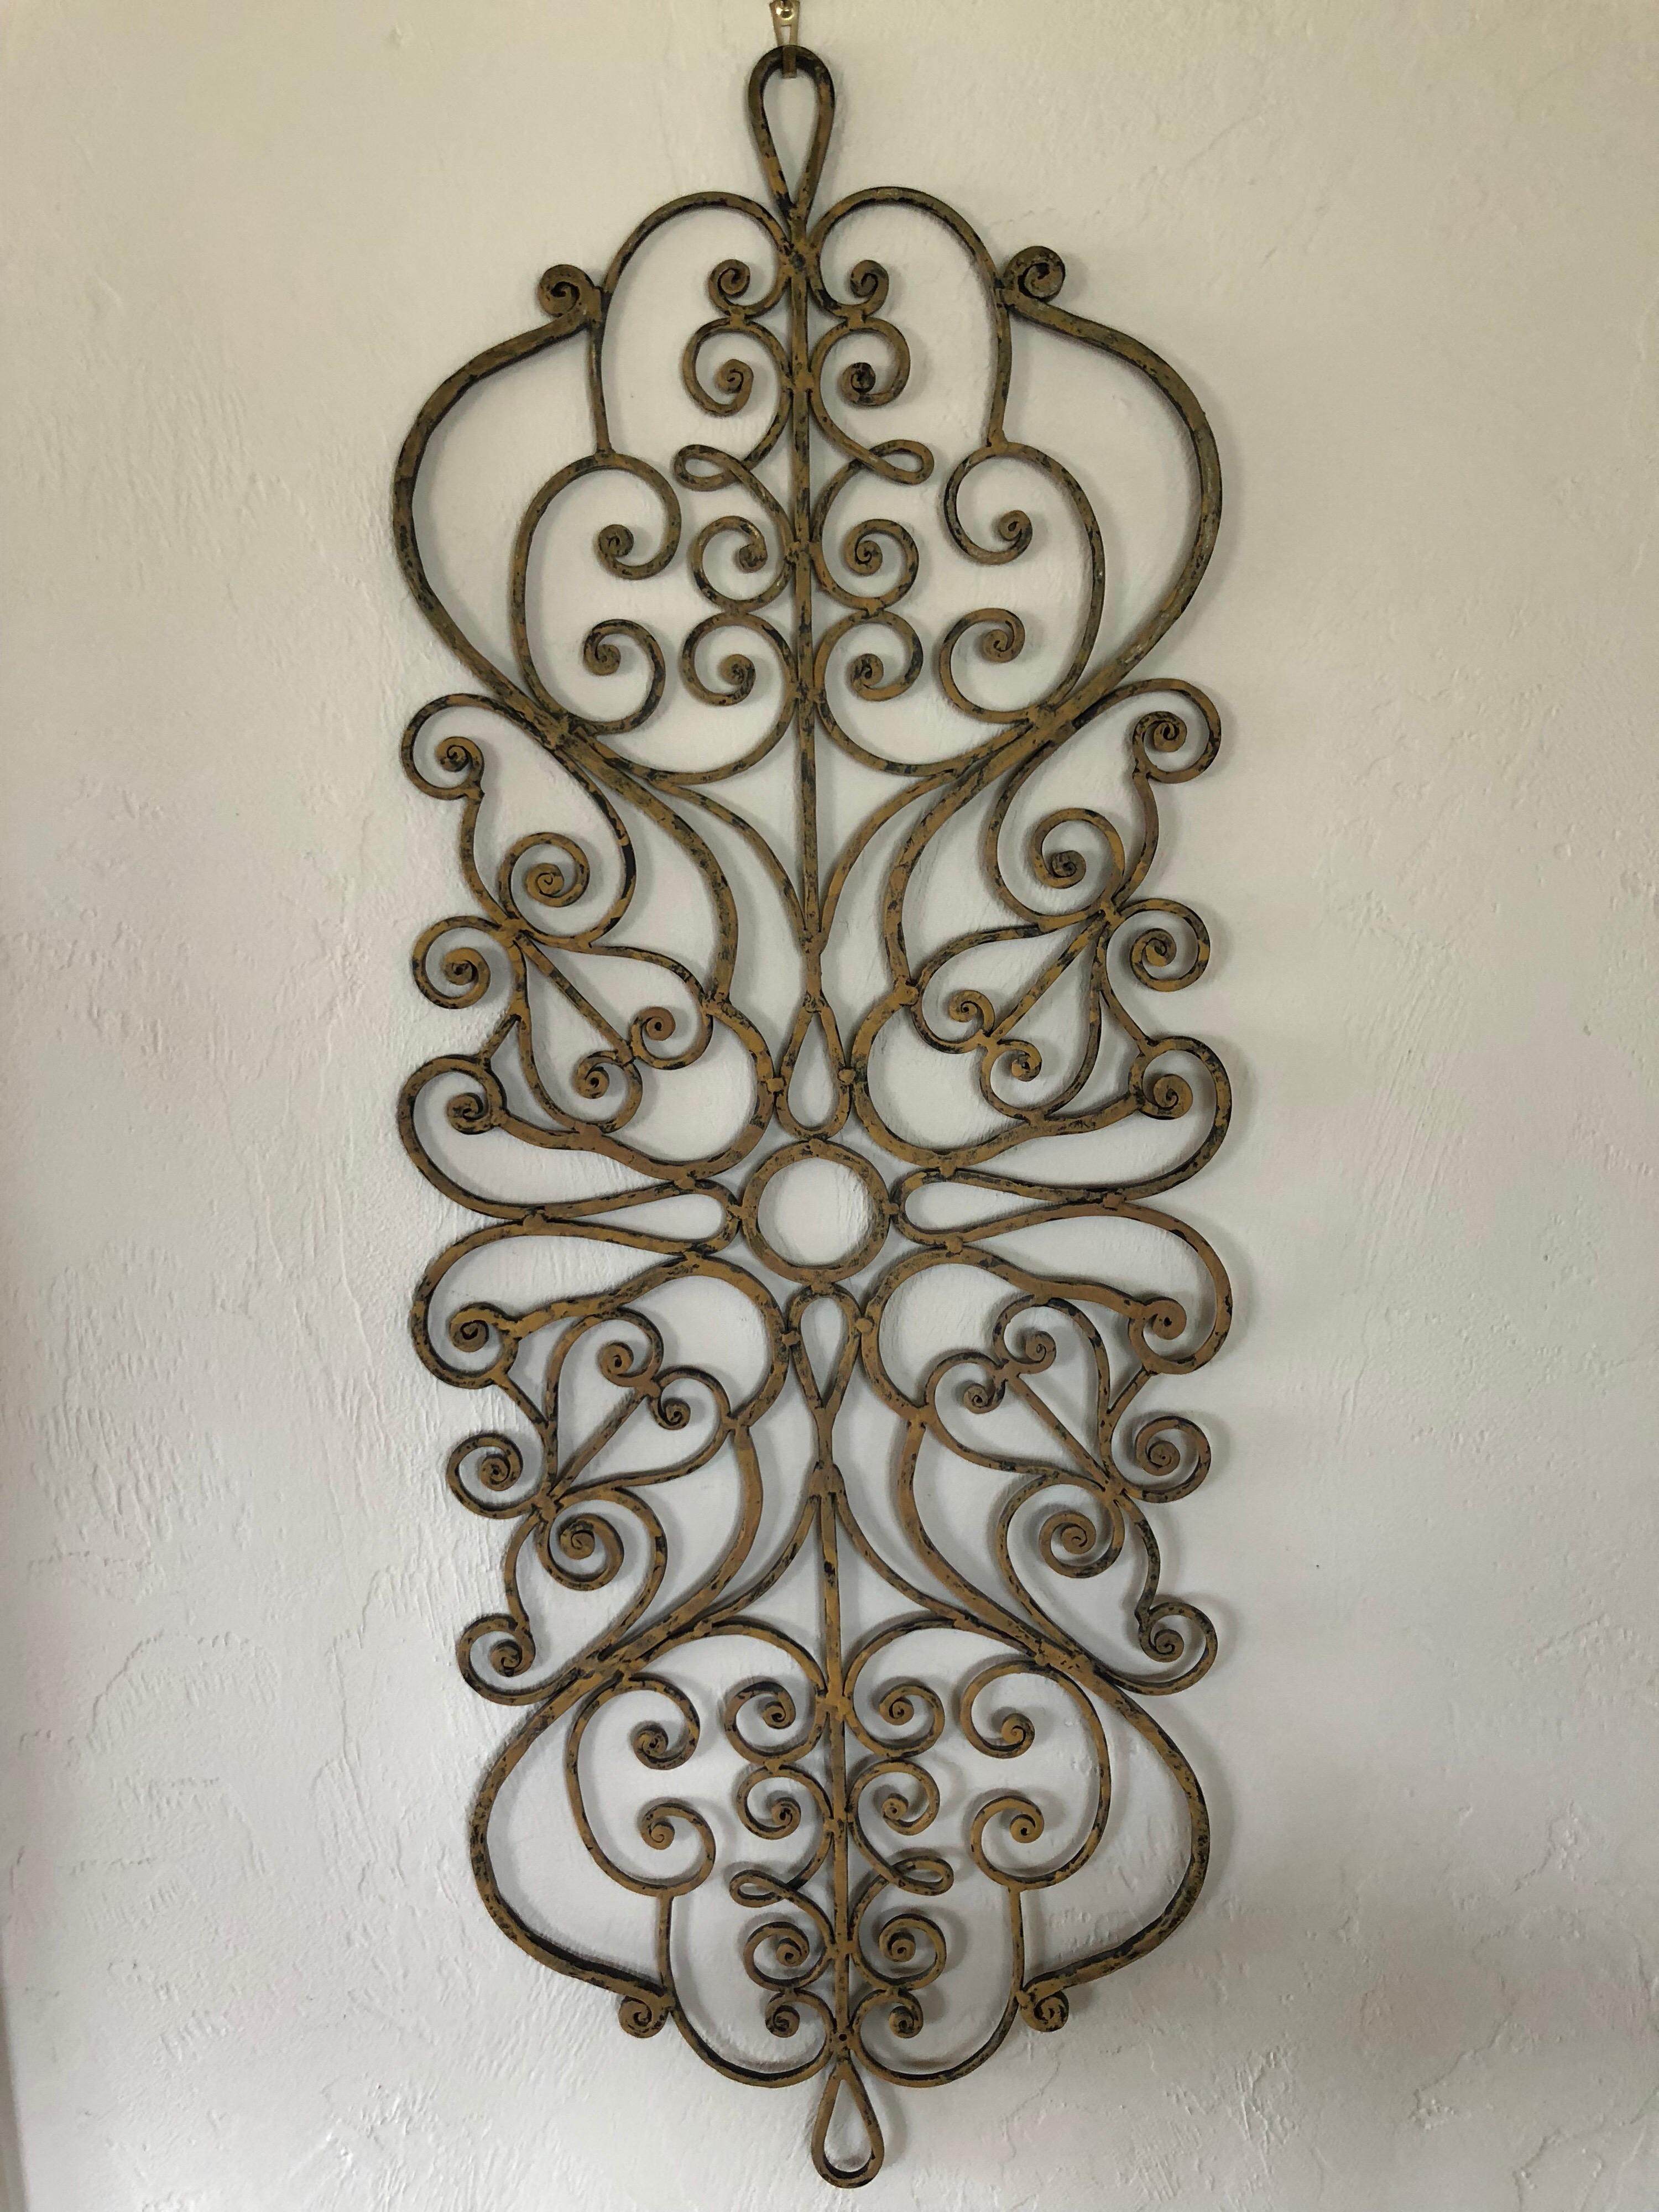 Large Hand-Wrought Iron Wall Sculpture 14